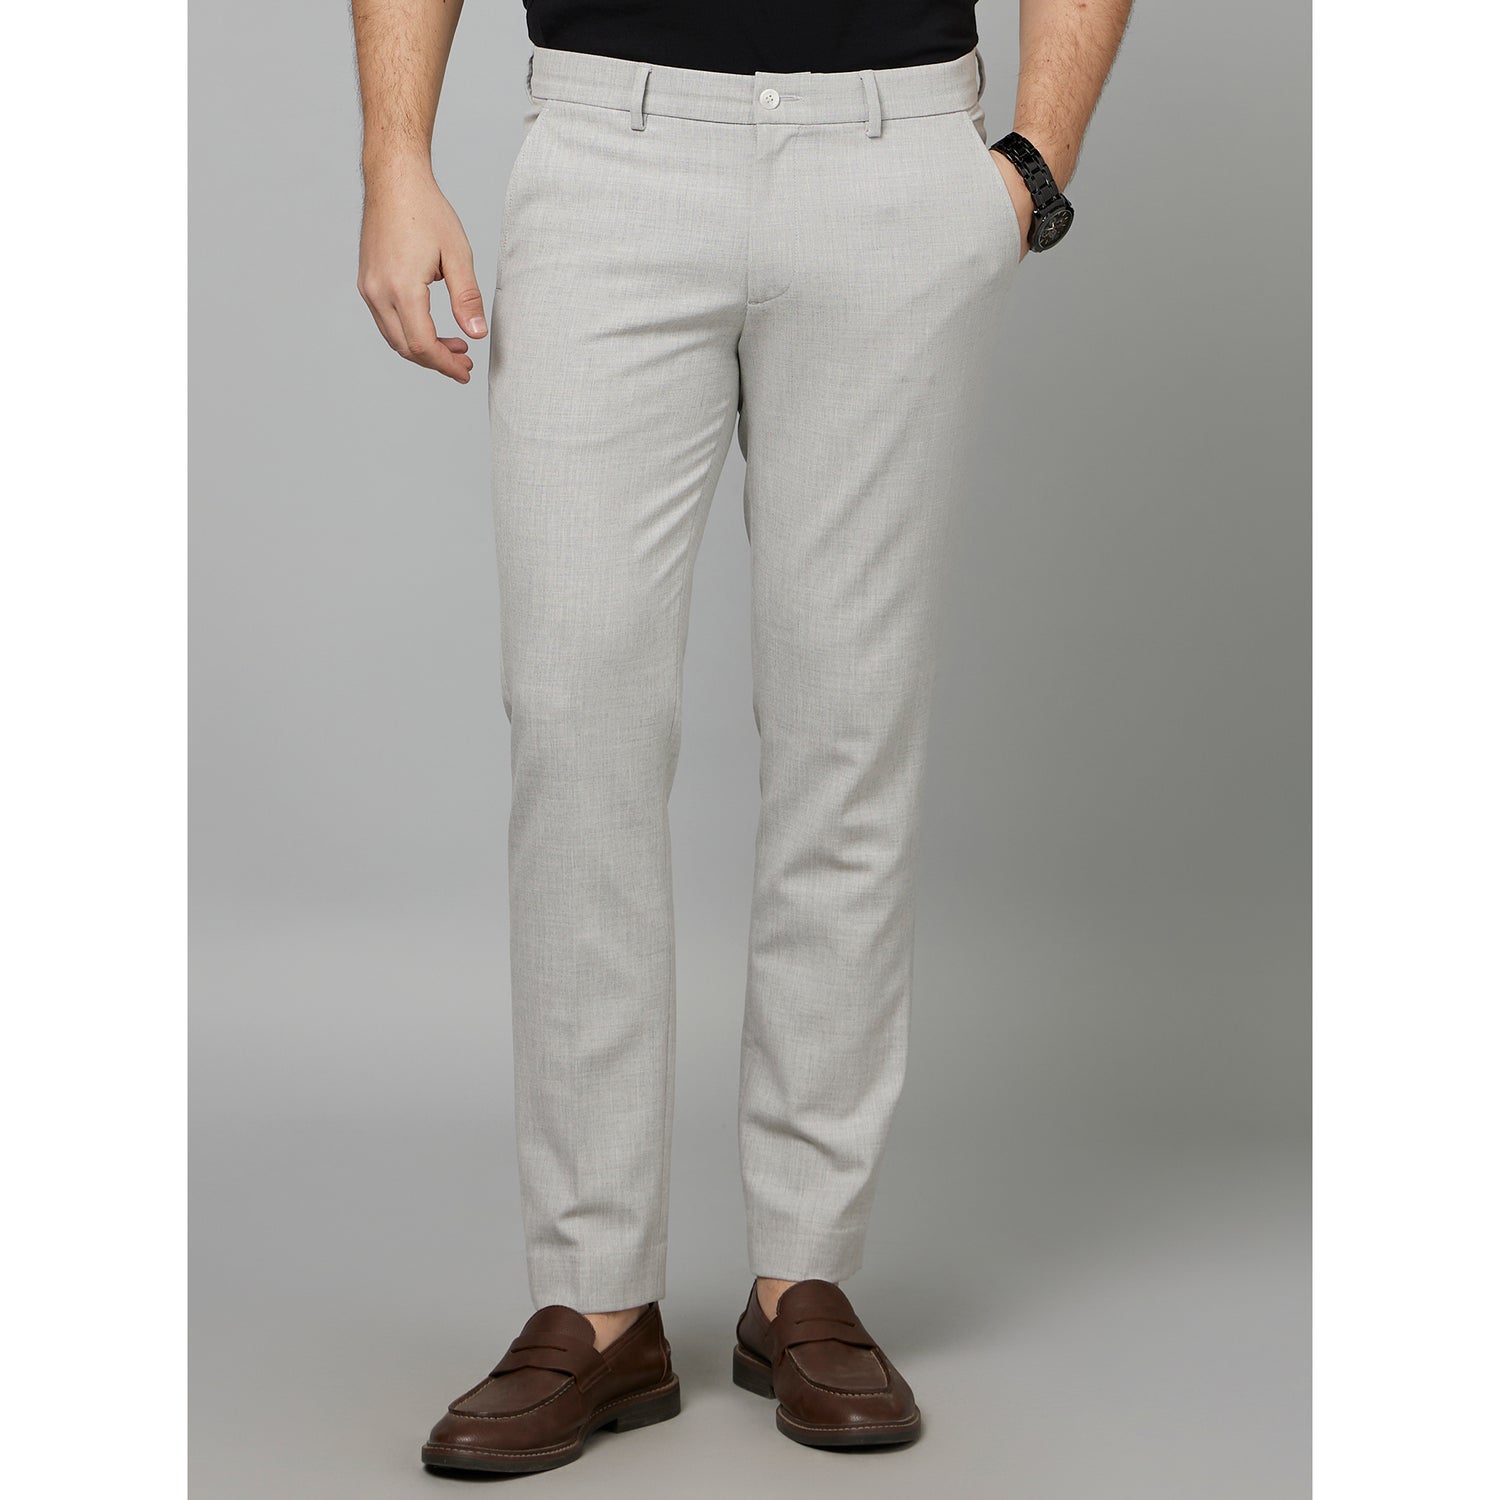 Grey Mid-Rise Classic Slim Fit Plain Chinos (FOFORM)